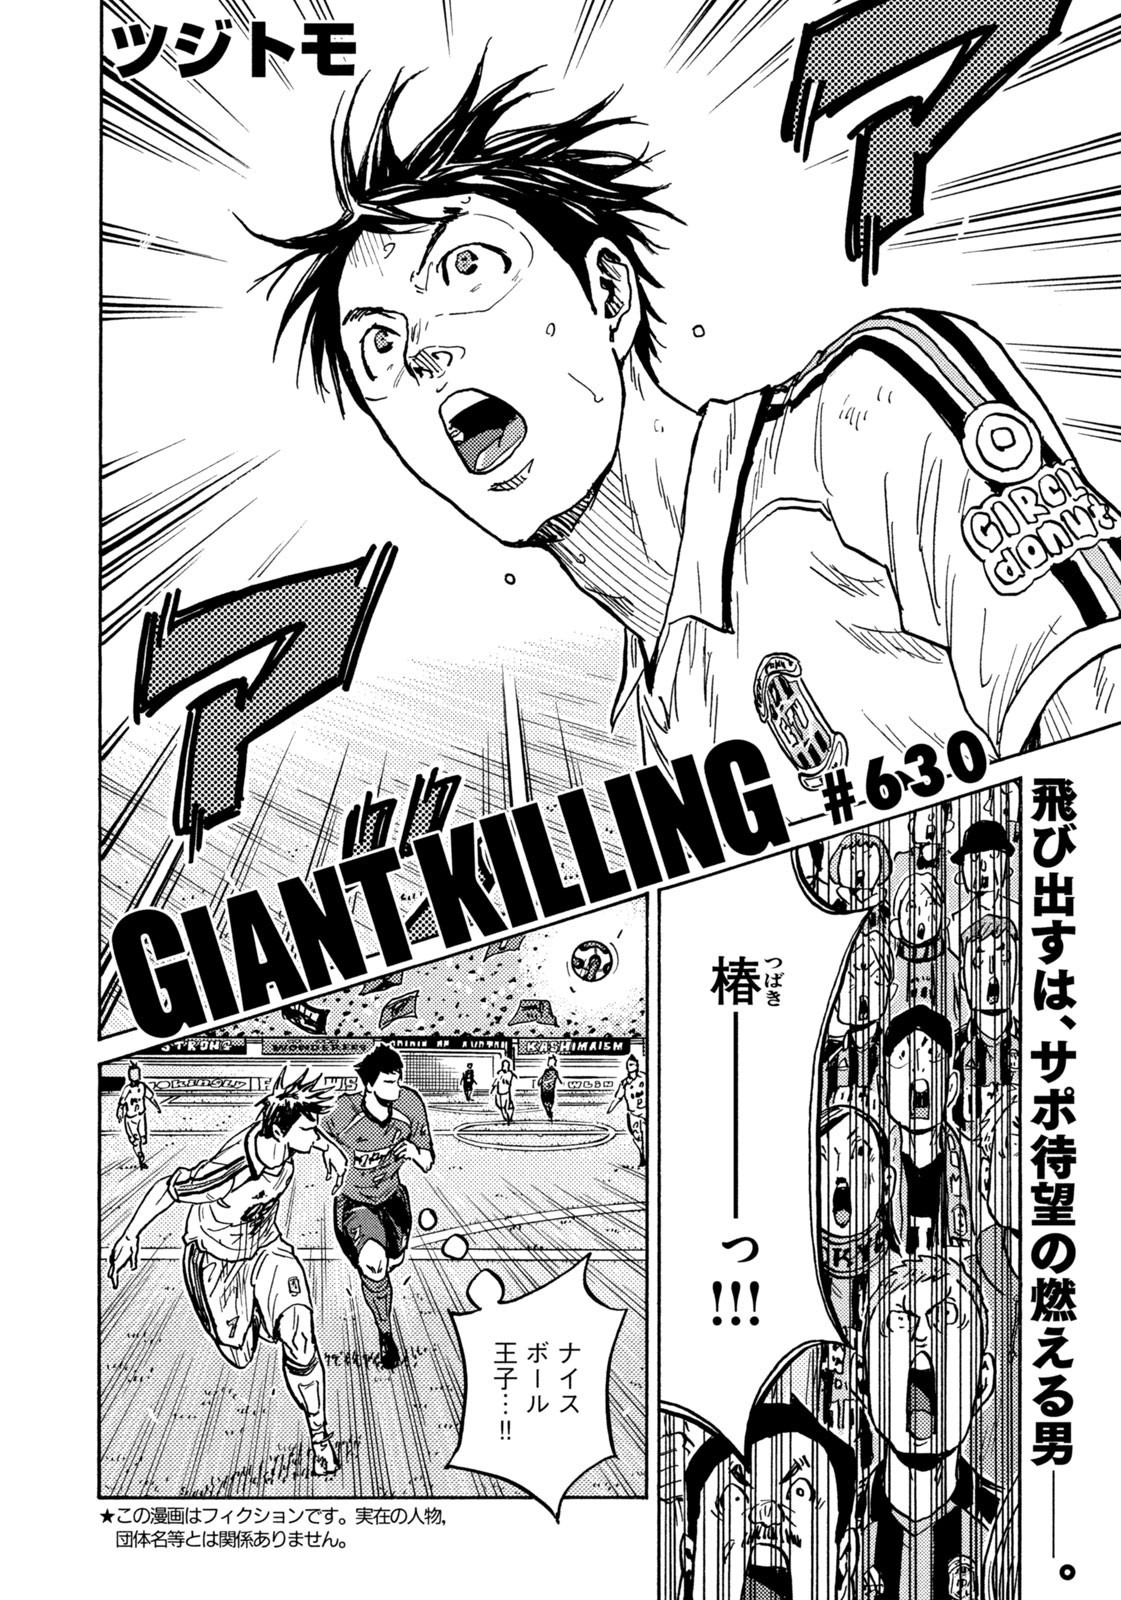 Giant Killing - Chapter 630 - Page 2